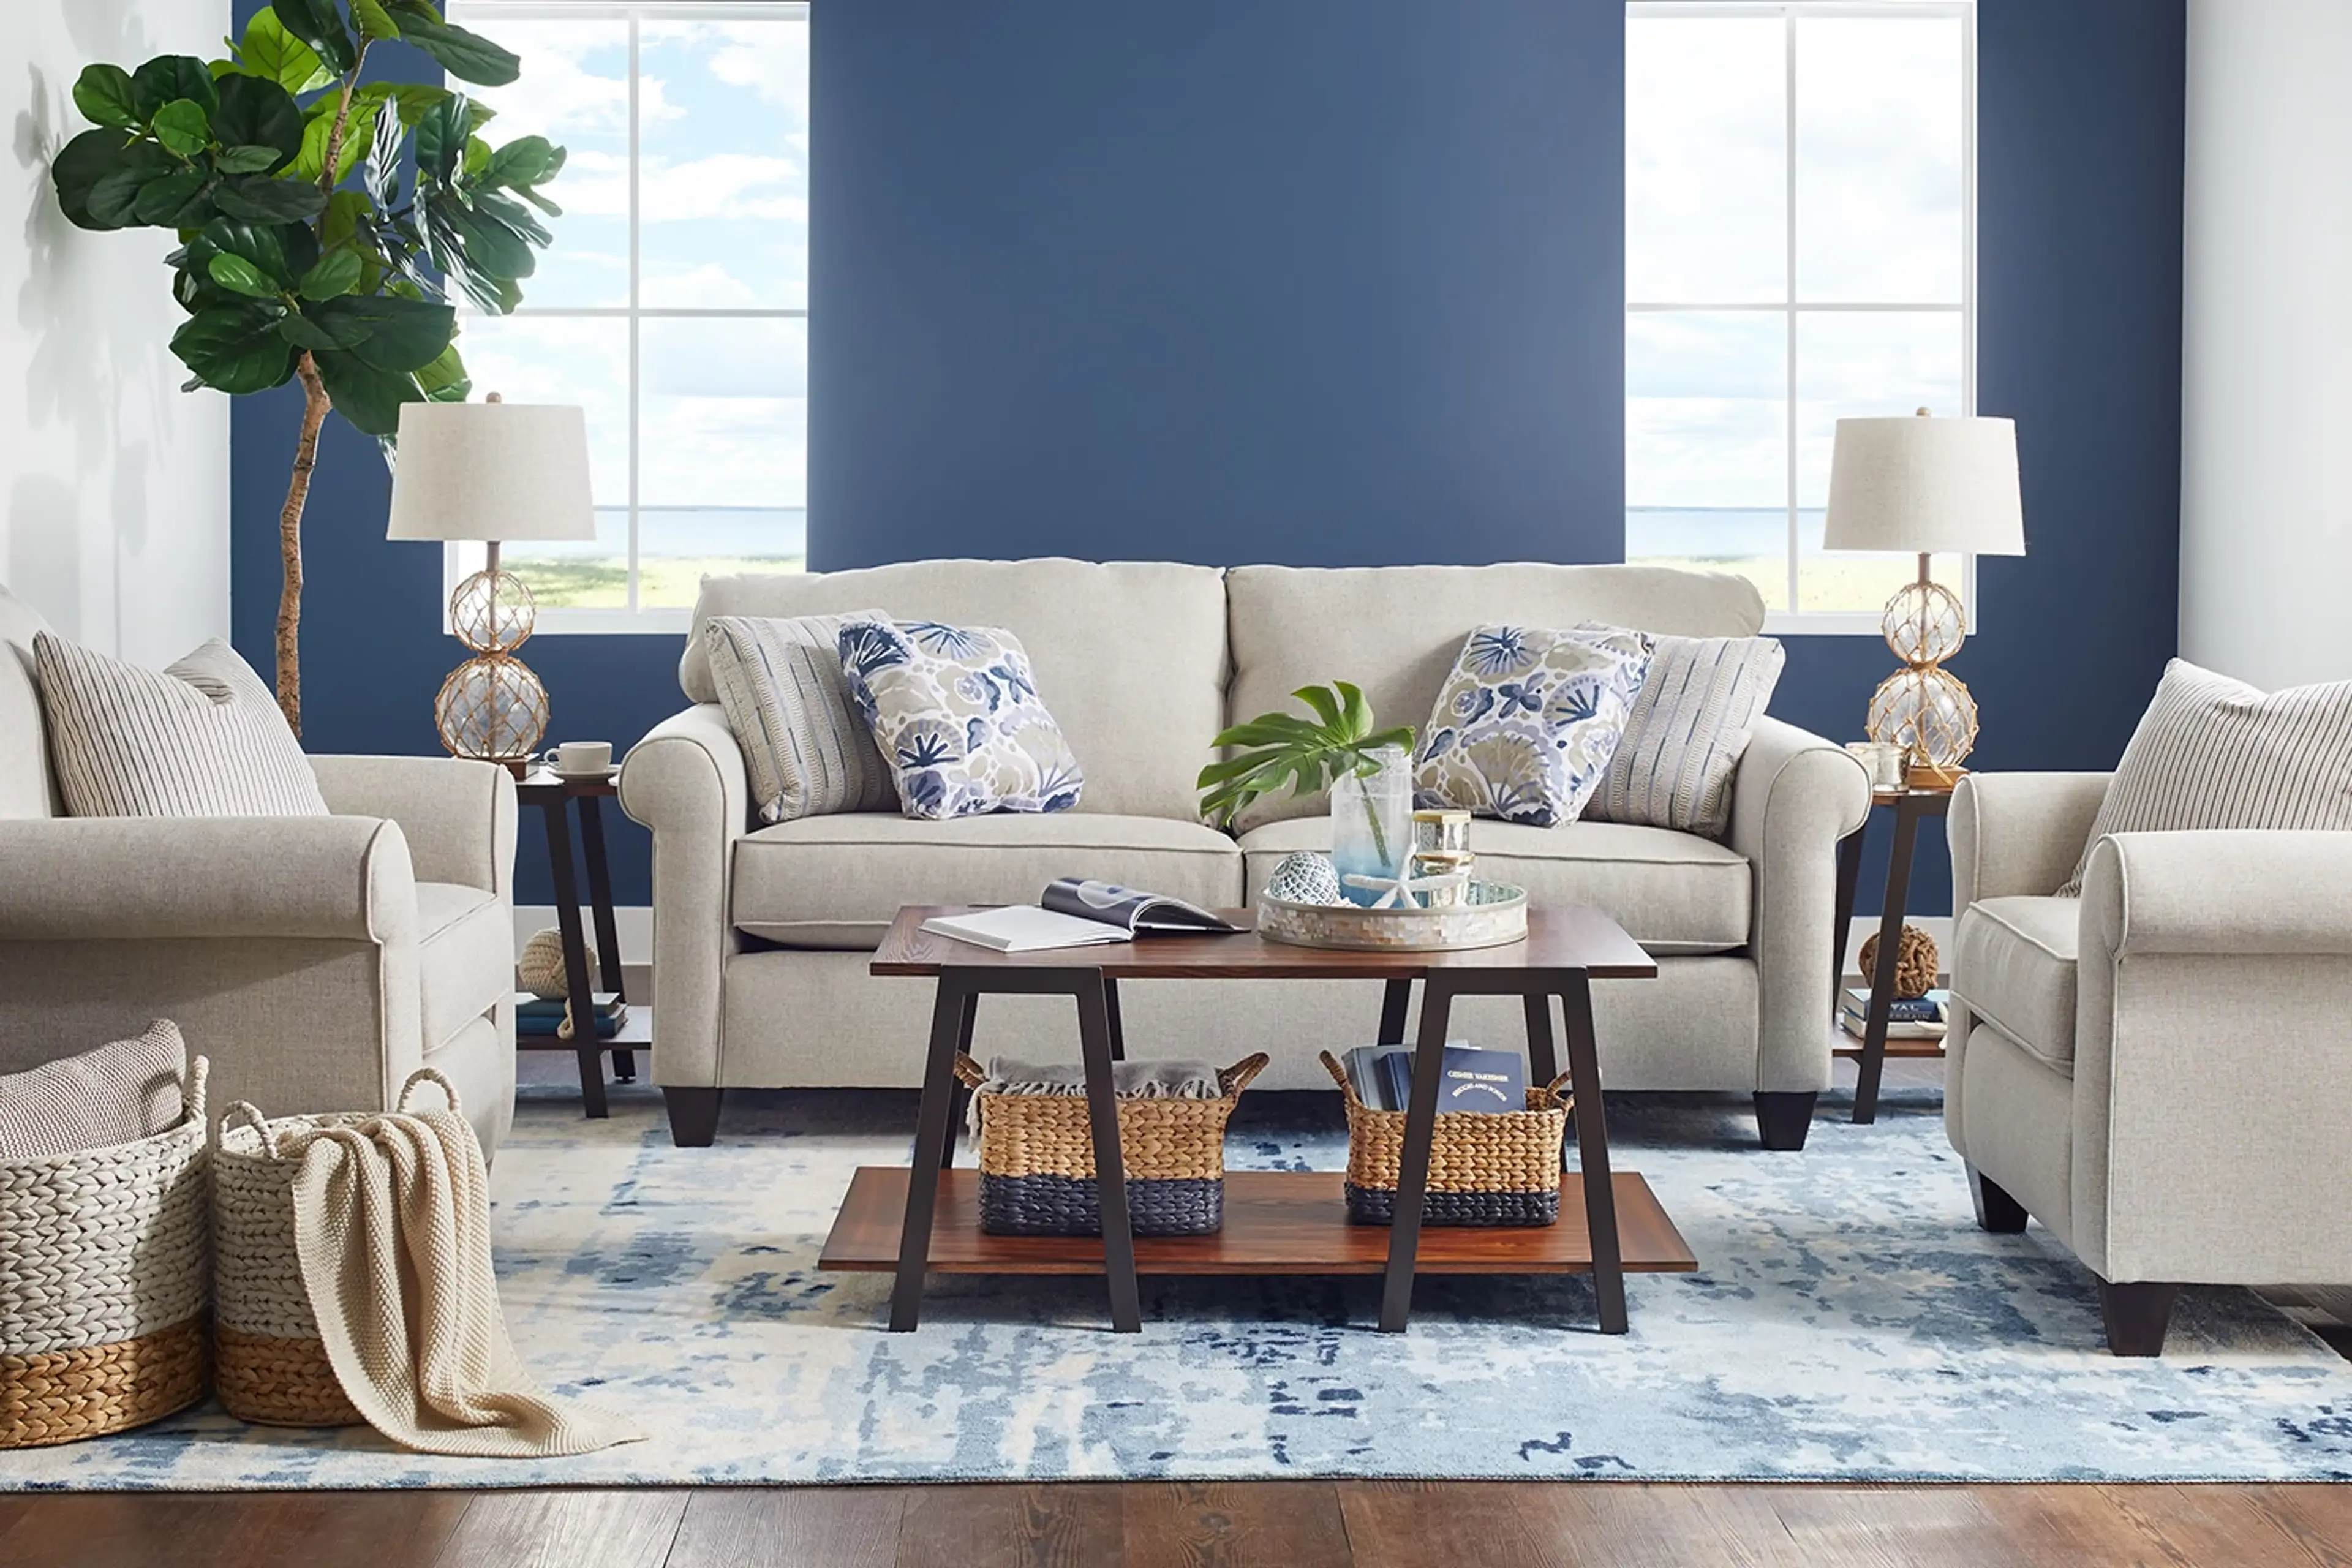 From Sectionals to Sofas: Your Style, Your Way